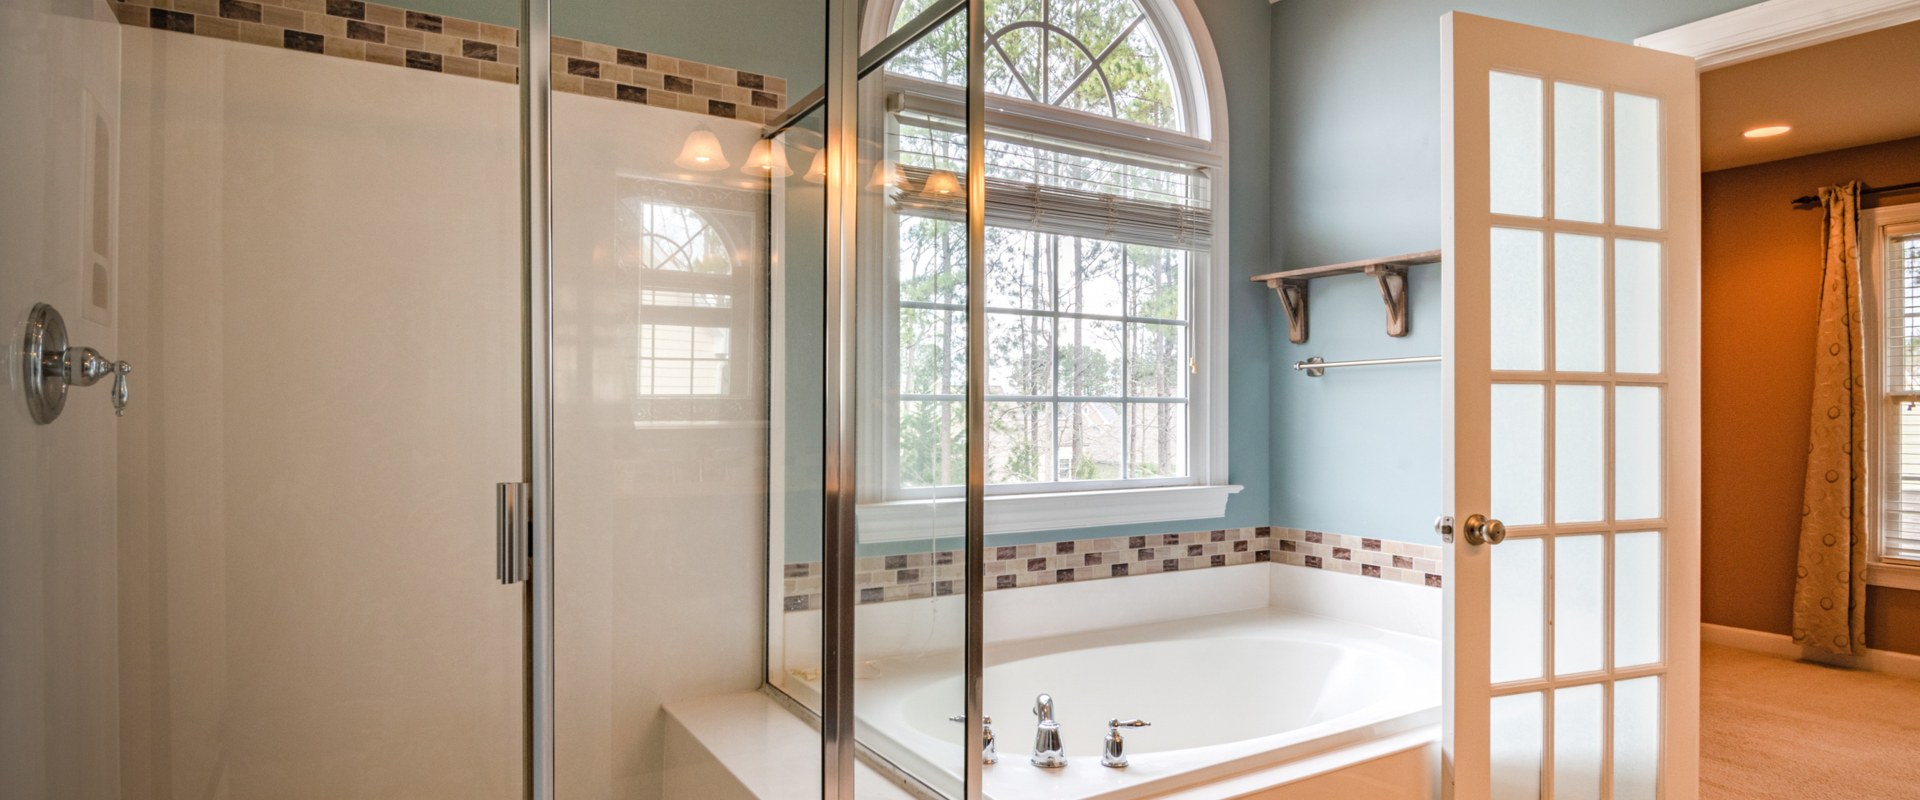 How to Keep Glass Shower Doors Clean and Spotless